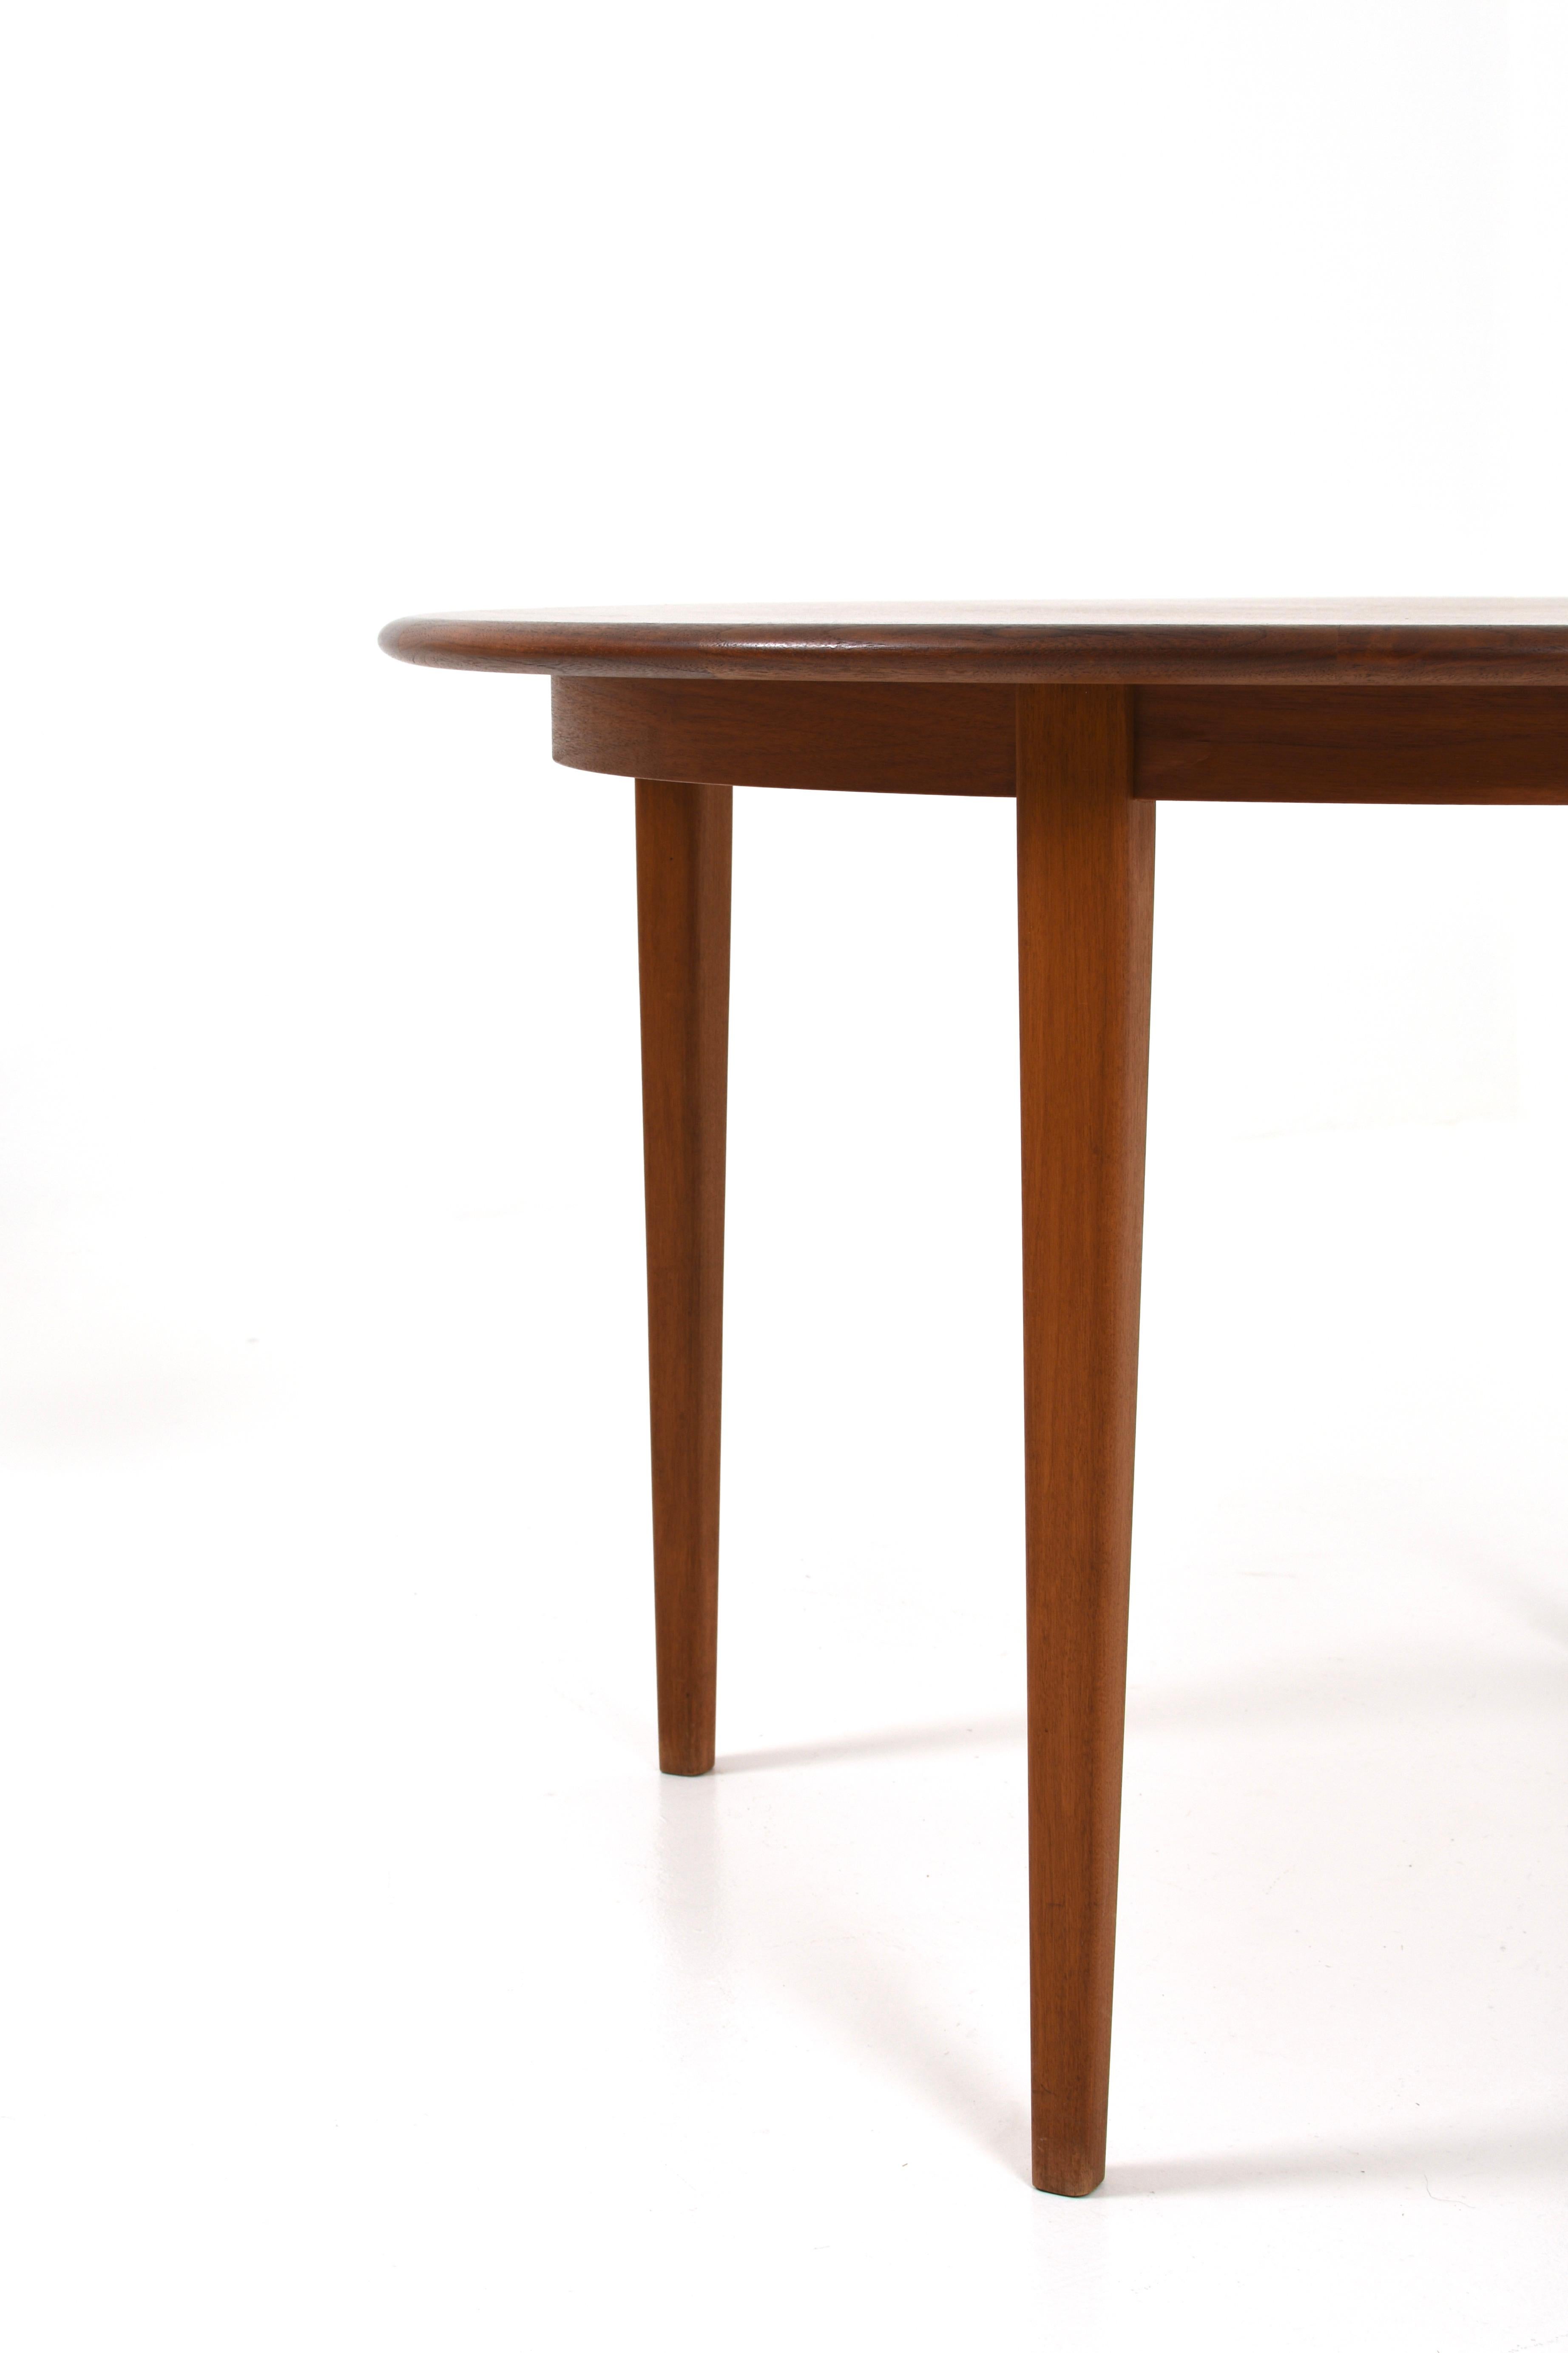 Danish Teak Mid-Century Modern Round Dining Table  In Good Condition For Sale In Göteborg, SE